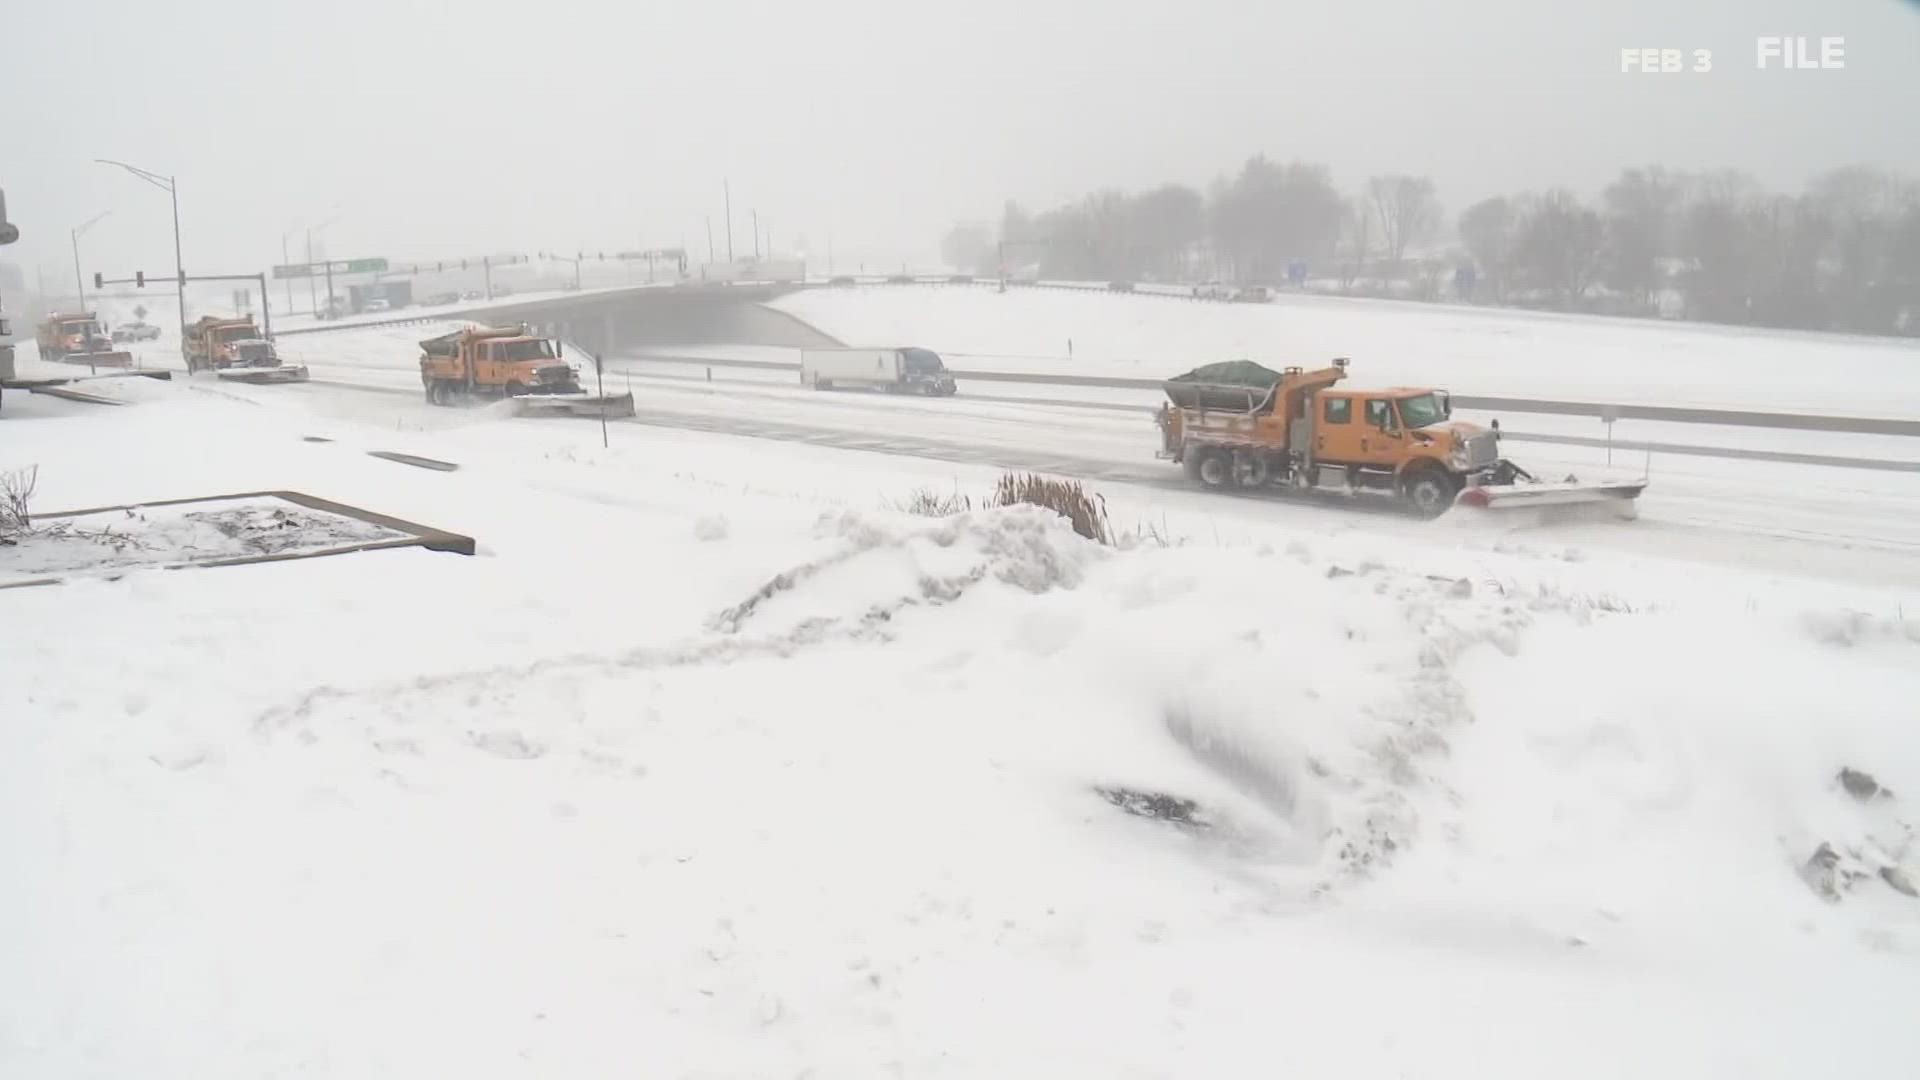 The Missouri Department of Transportation started winter weather drills on Thursday as they experience staffing shortages. IDOT is facing staffing shortages as well.